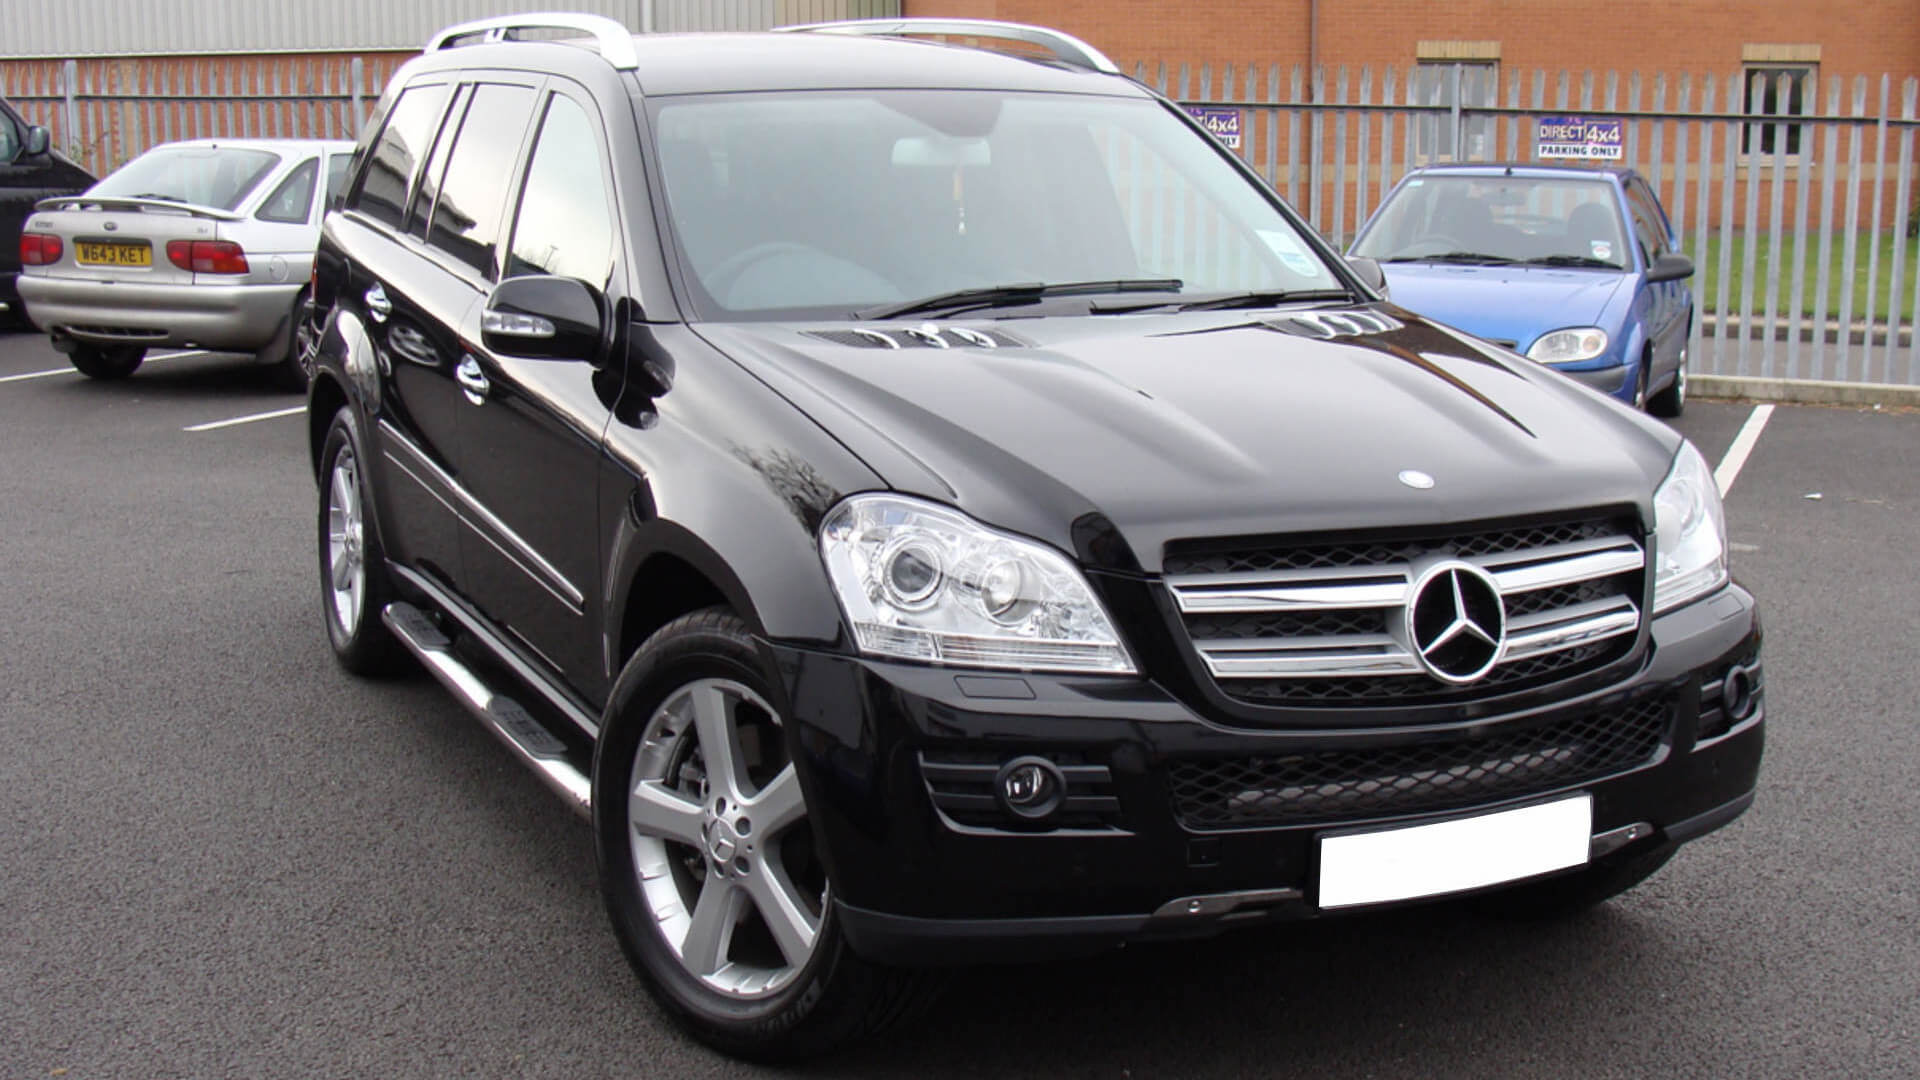 Direct4x4 Accessories for Mercedes Benz Vehicles